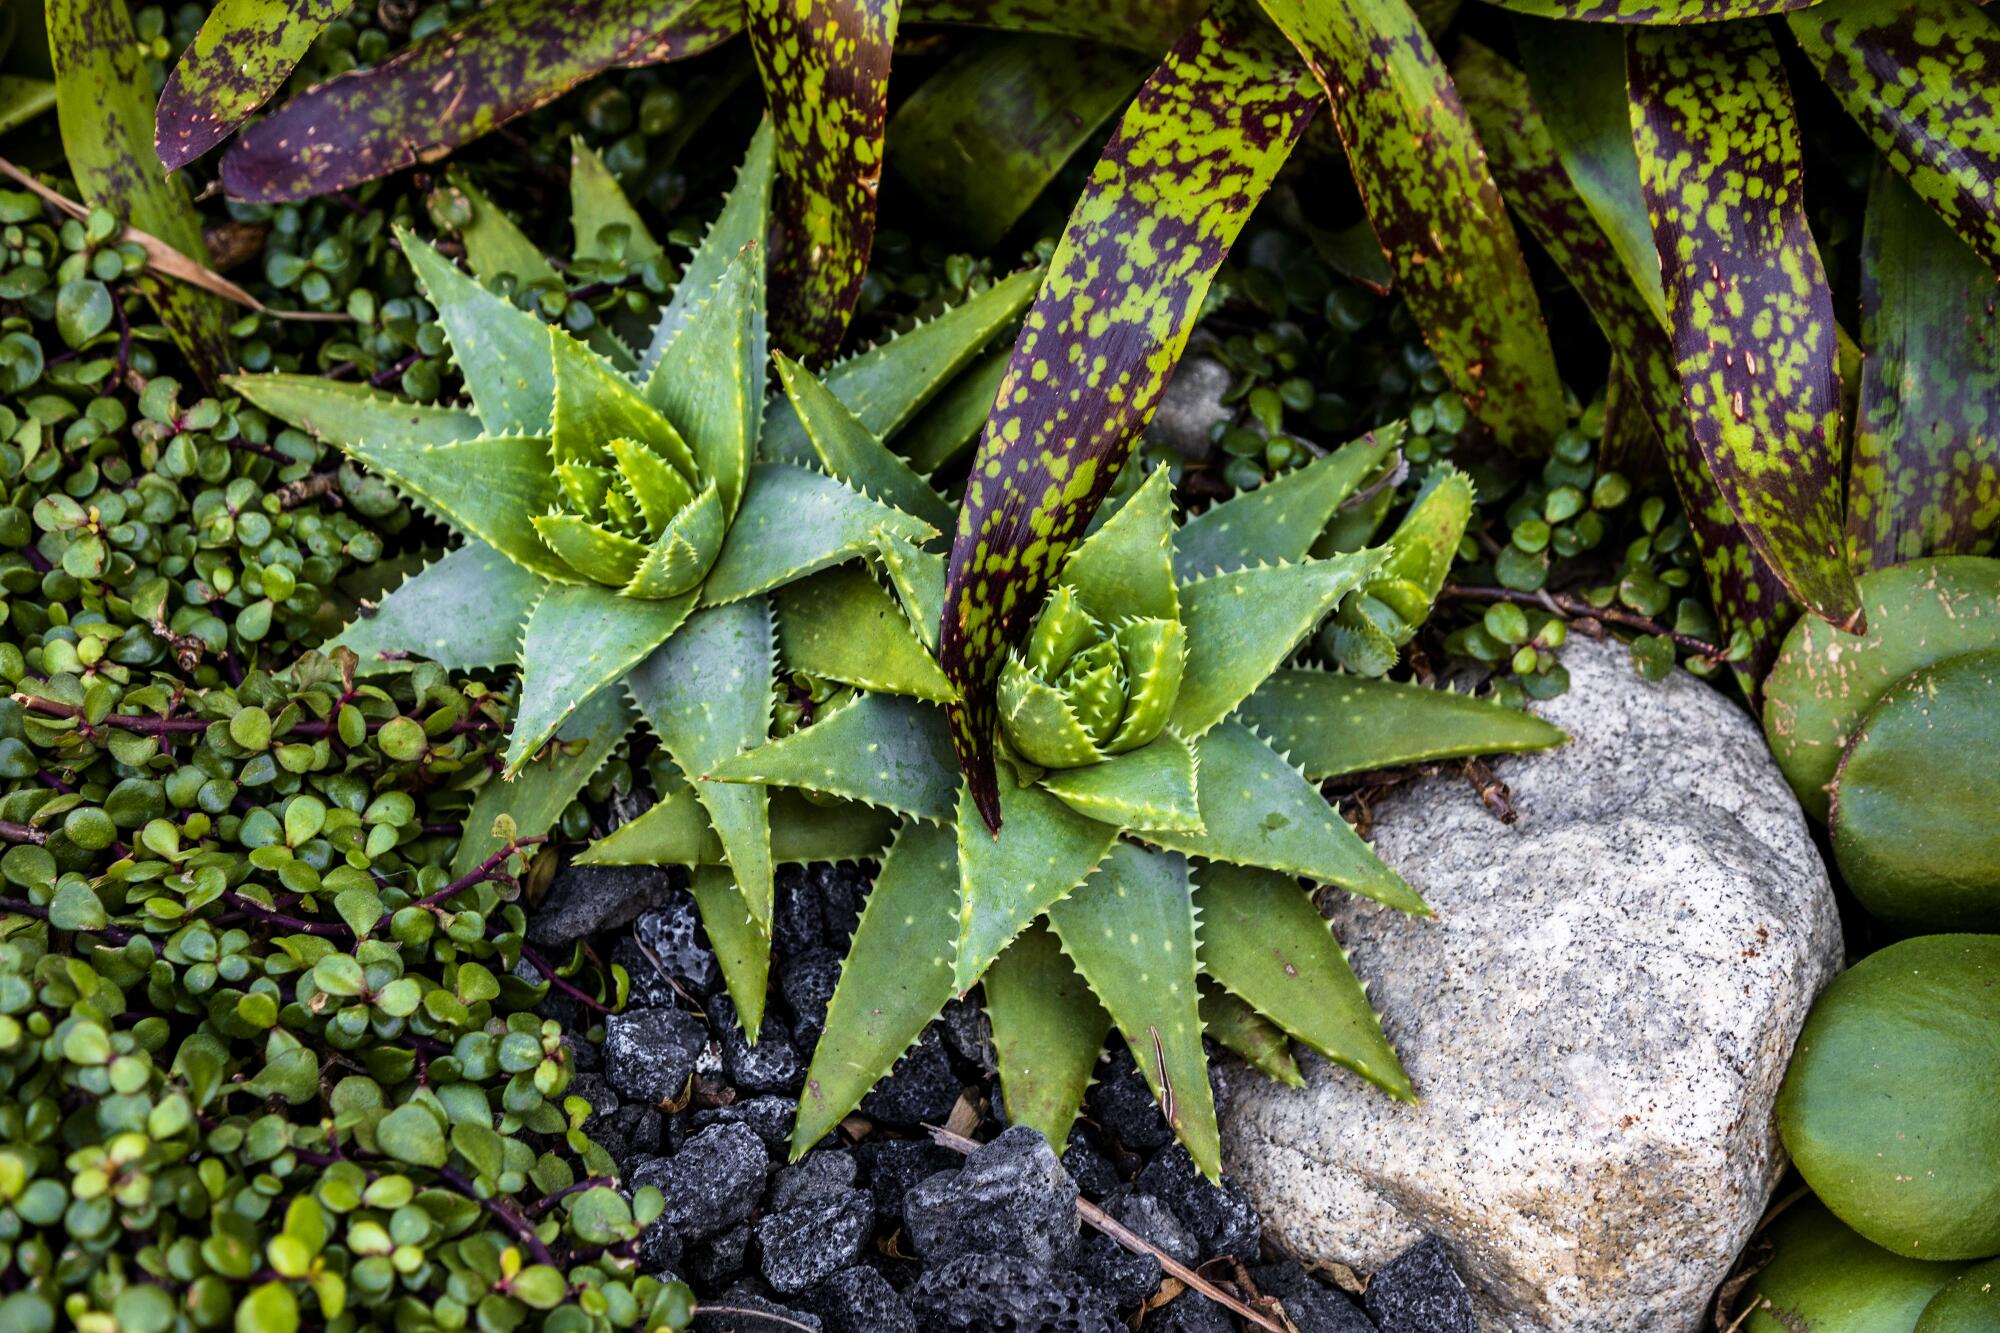 A pair of Aloe brevifolia succulents growing next to a purple-leaved bromeliad and elephant bush (Portulacaria afra)